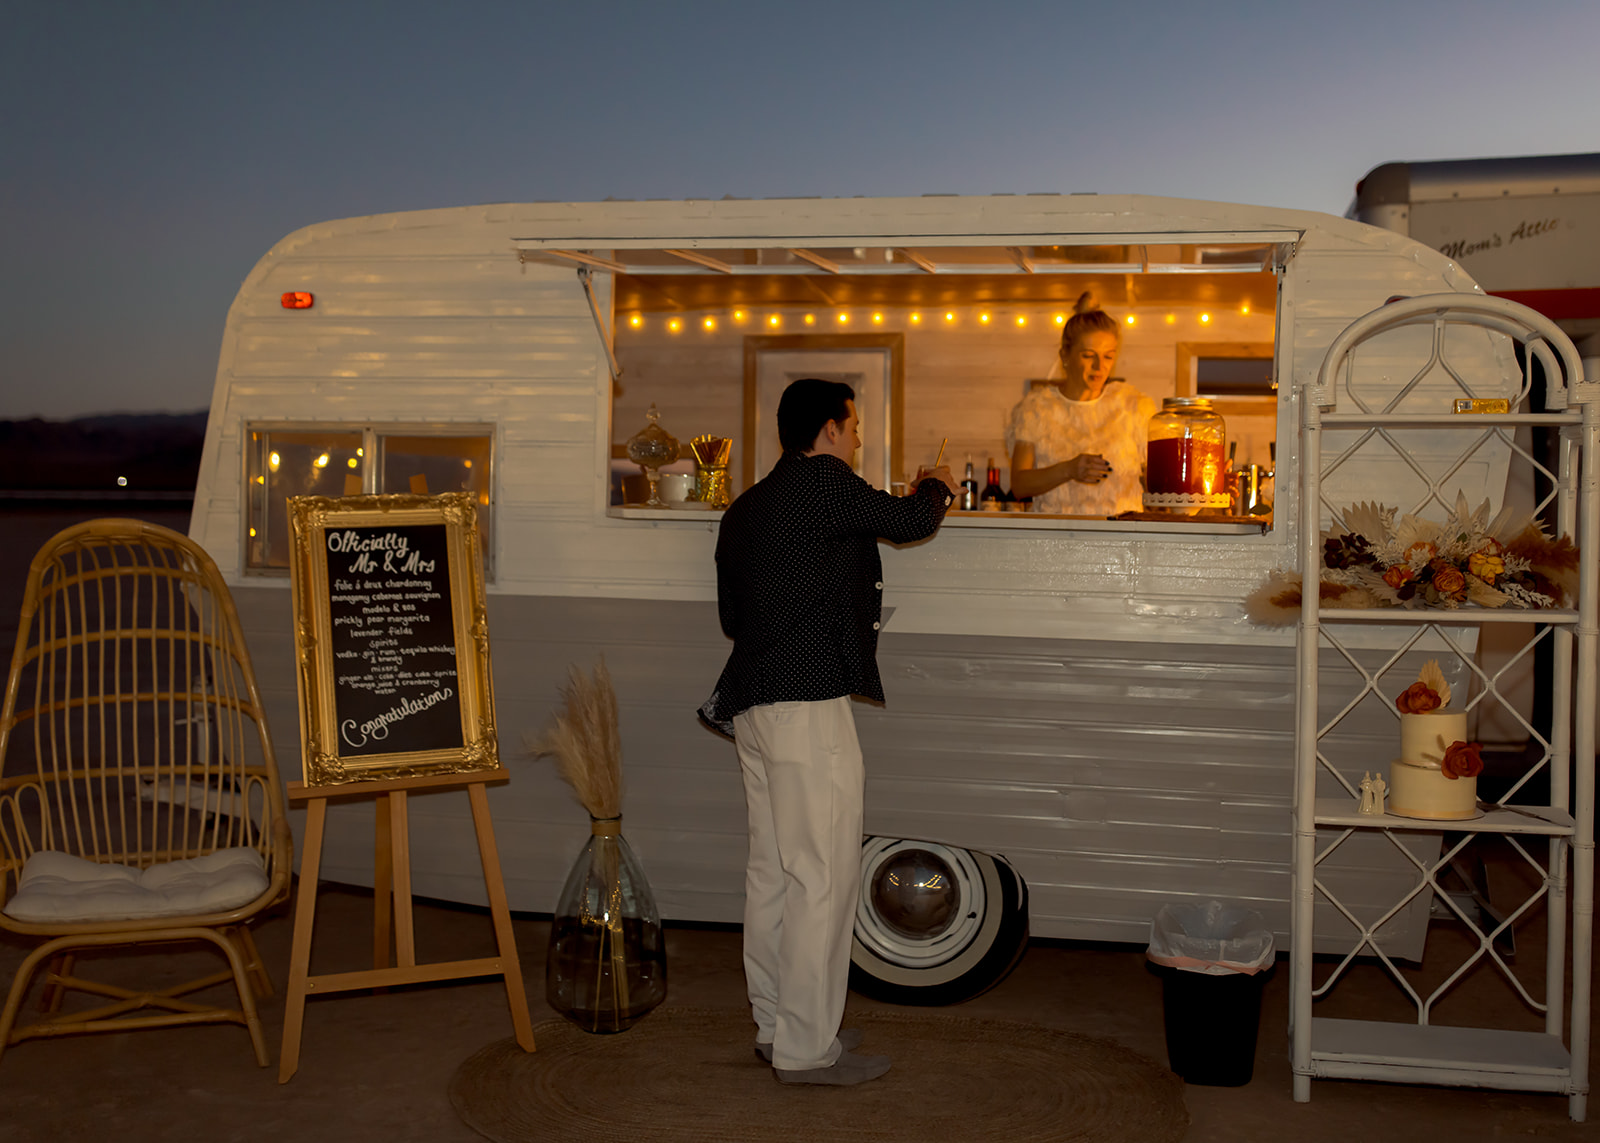 Guest getting drink at mobile bar in desert 